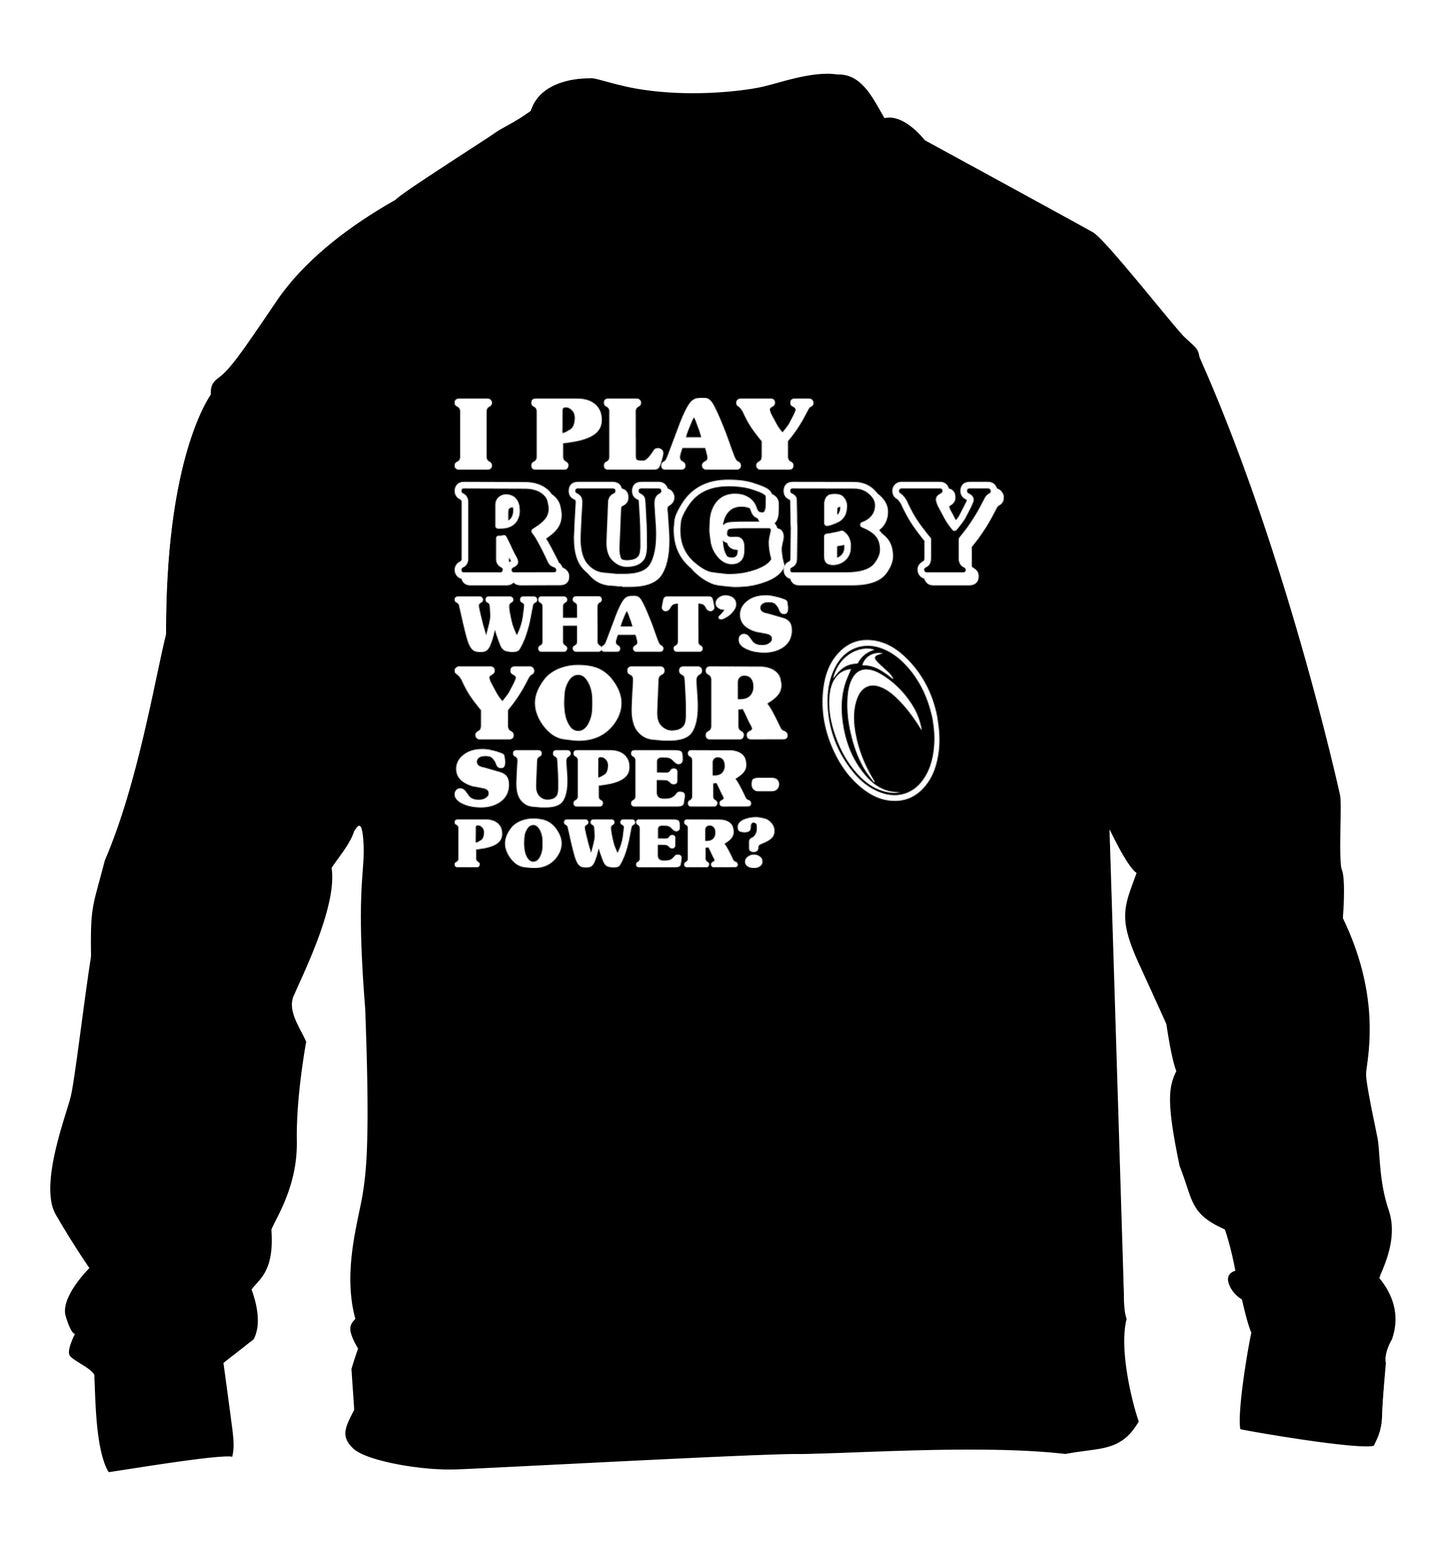 I play rugby what's your superpower? children's black sweater 12-13 Years